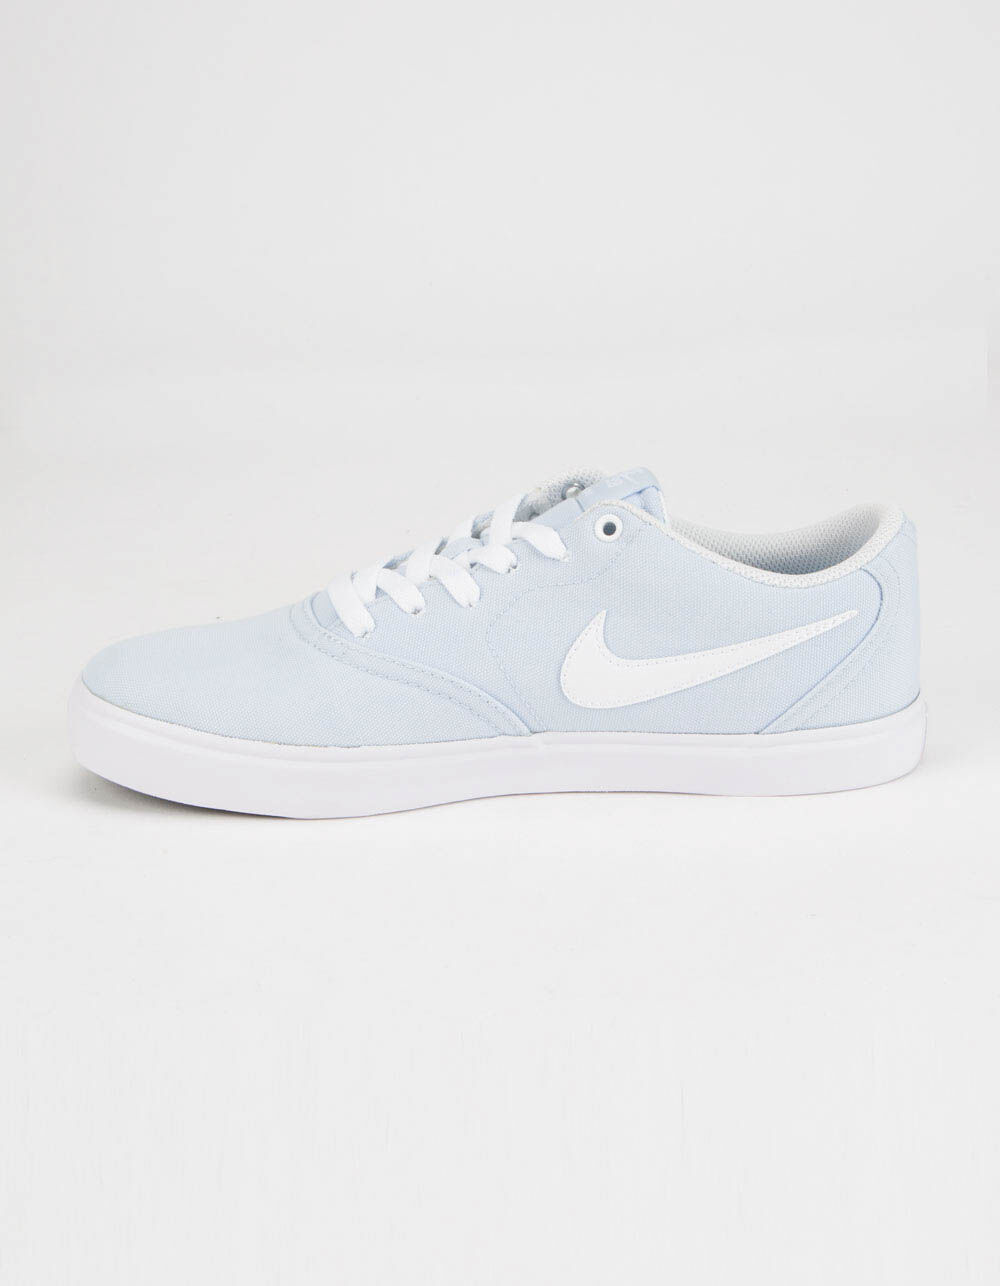 NIKE SB Check Solarsoft Canvas Baby Blue Womens Shoes - BABY BLUE | Tillys